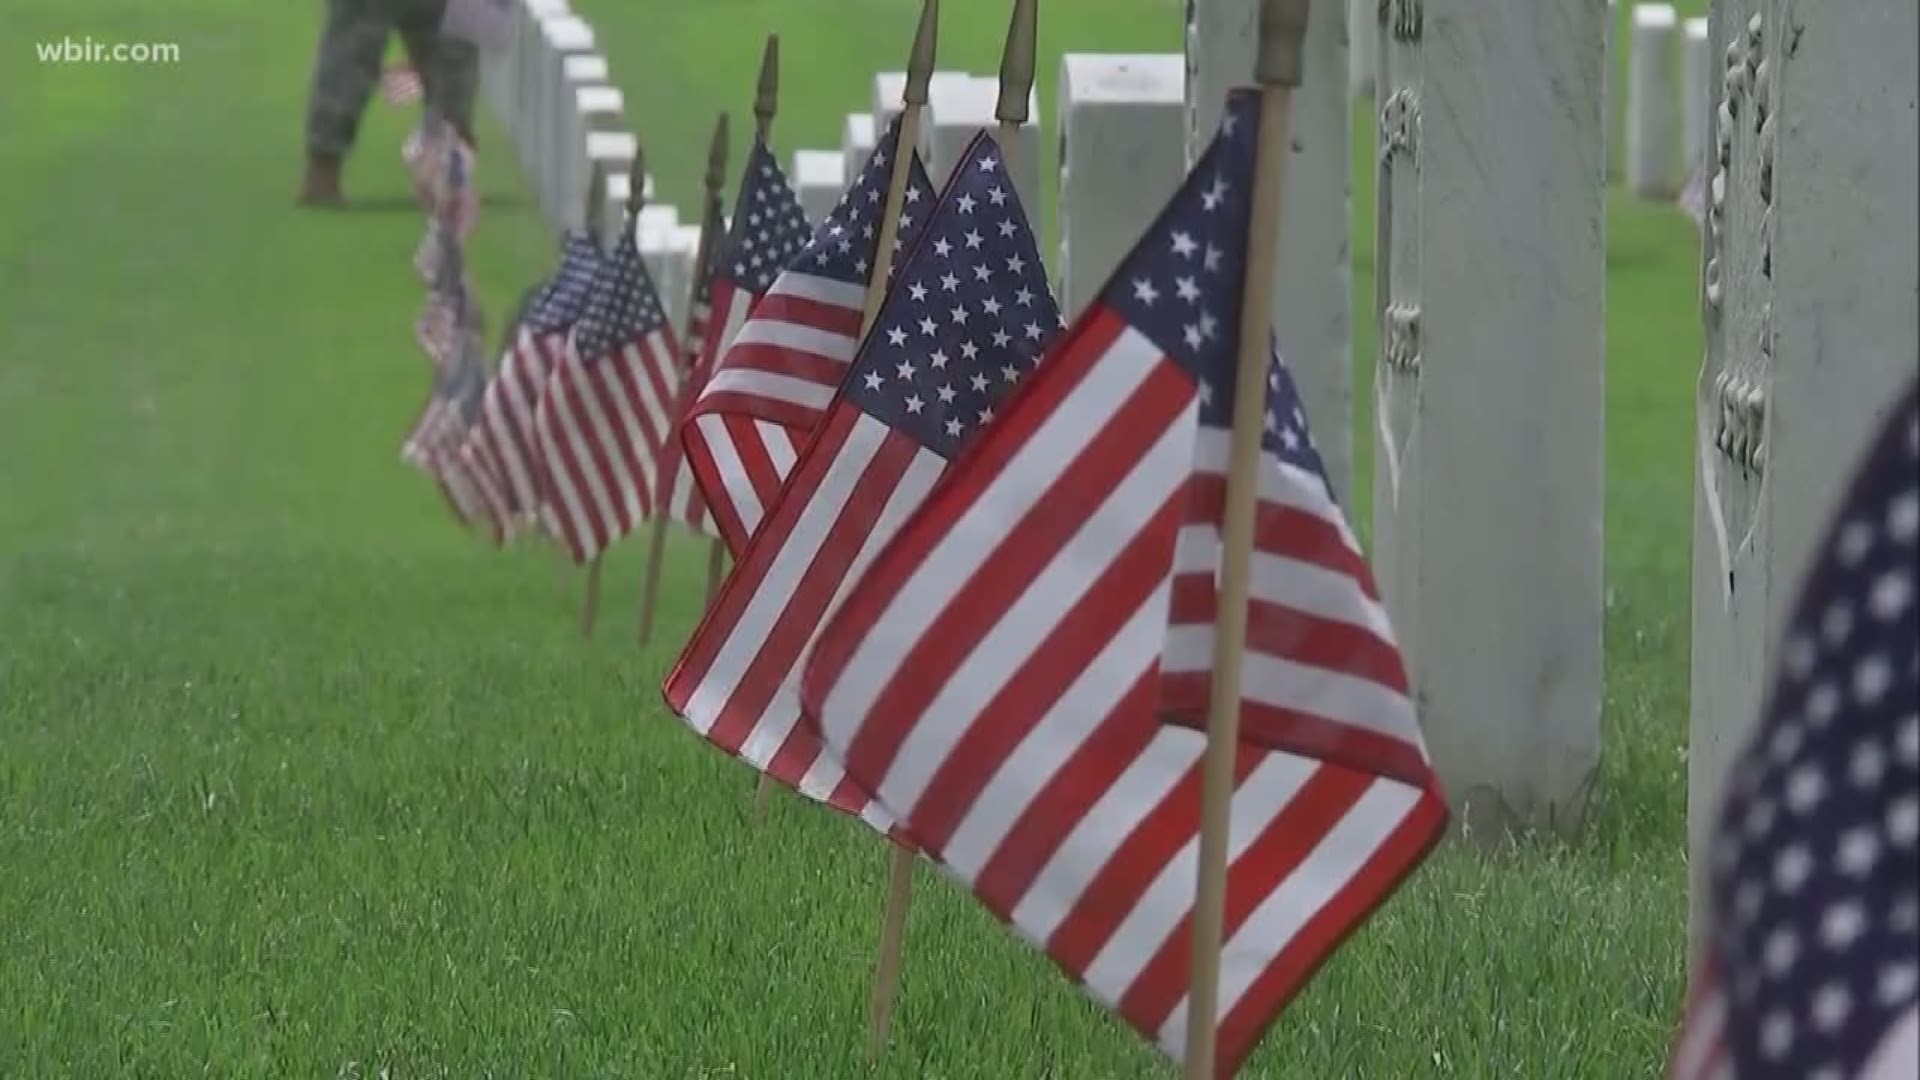 East Tennessee will pause to remember the service and sacrifice made by men and women in the armed forces today. Because it is Memorial Day, the United States Flag is flown at half-staff and graves are decorated with small United States flags.